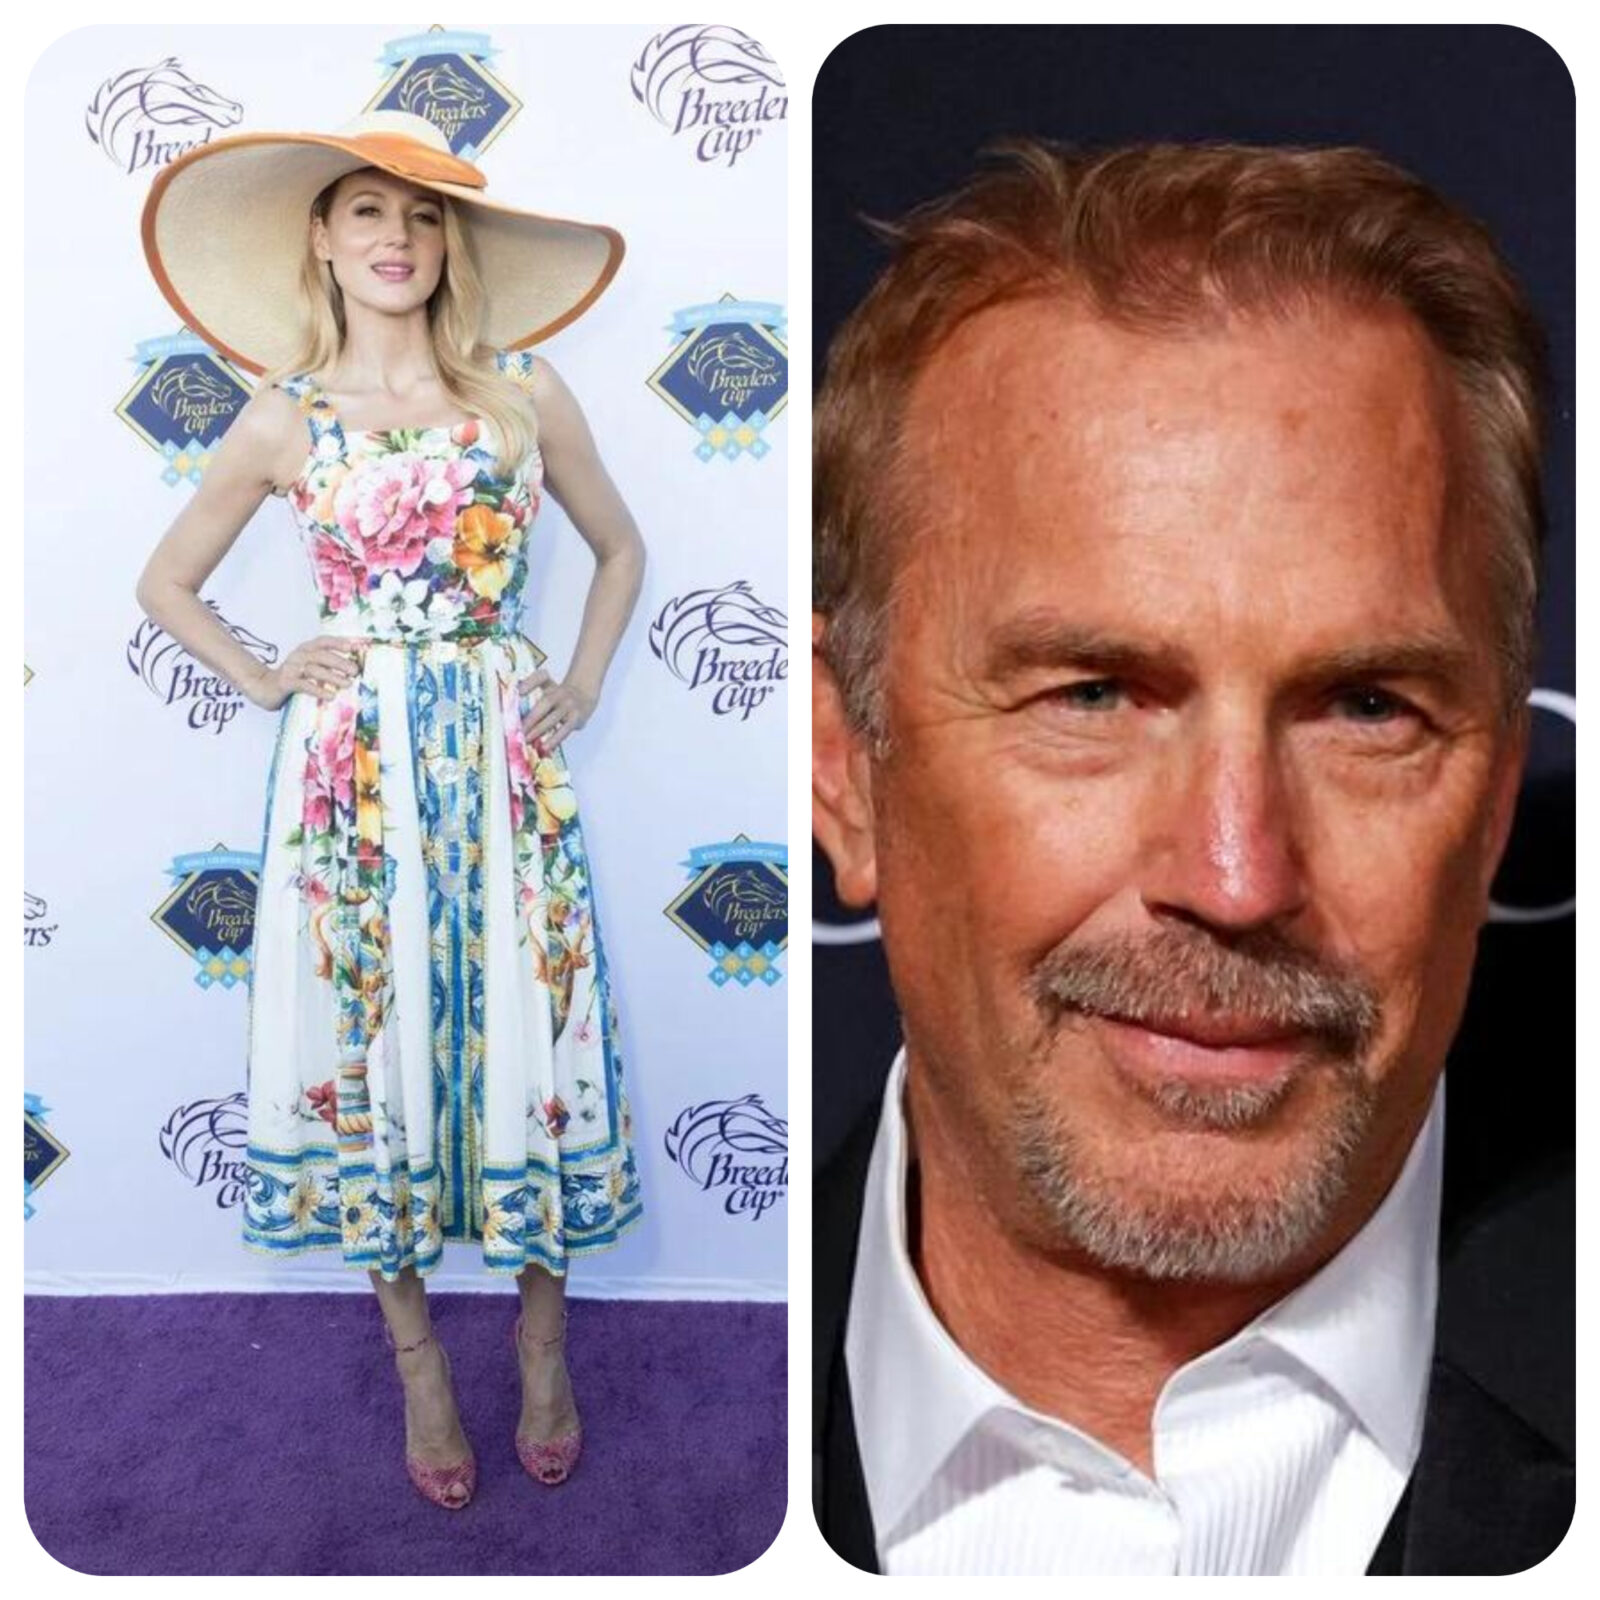 Kevin Costner, 68, dating much younger singer Jewel?